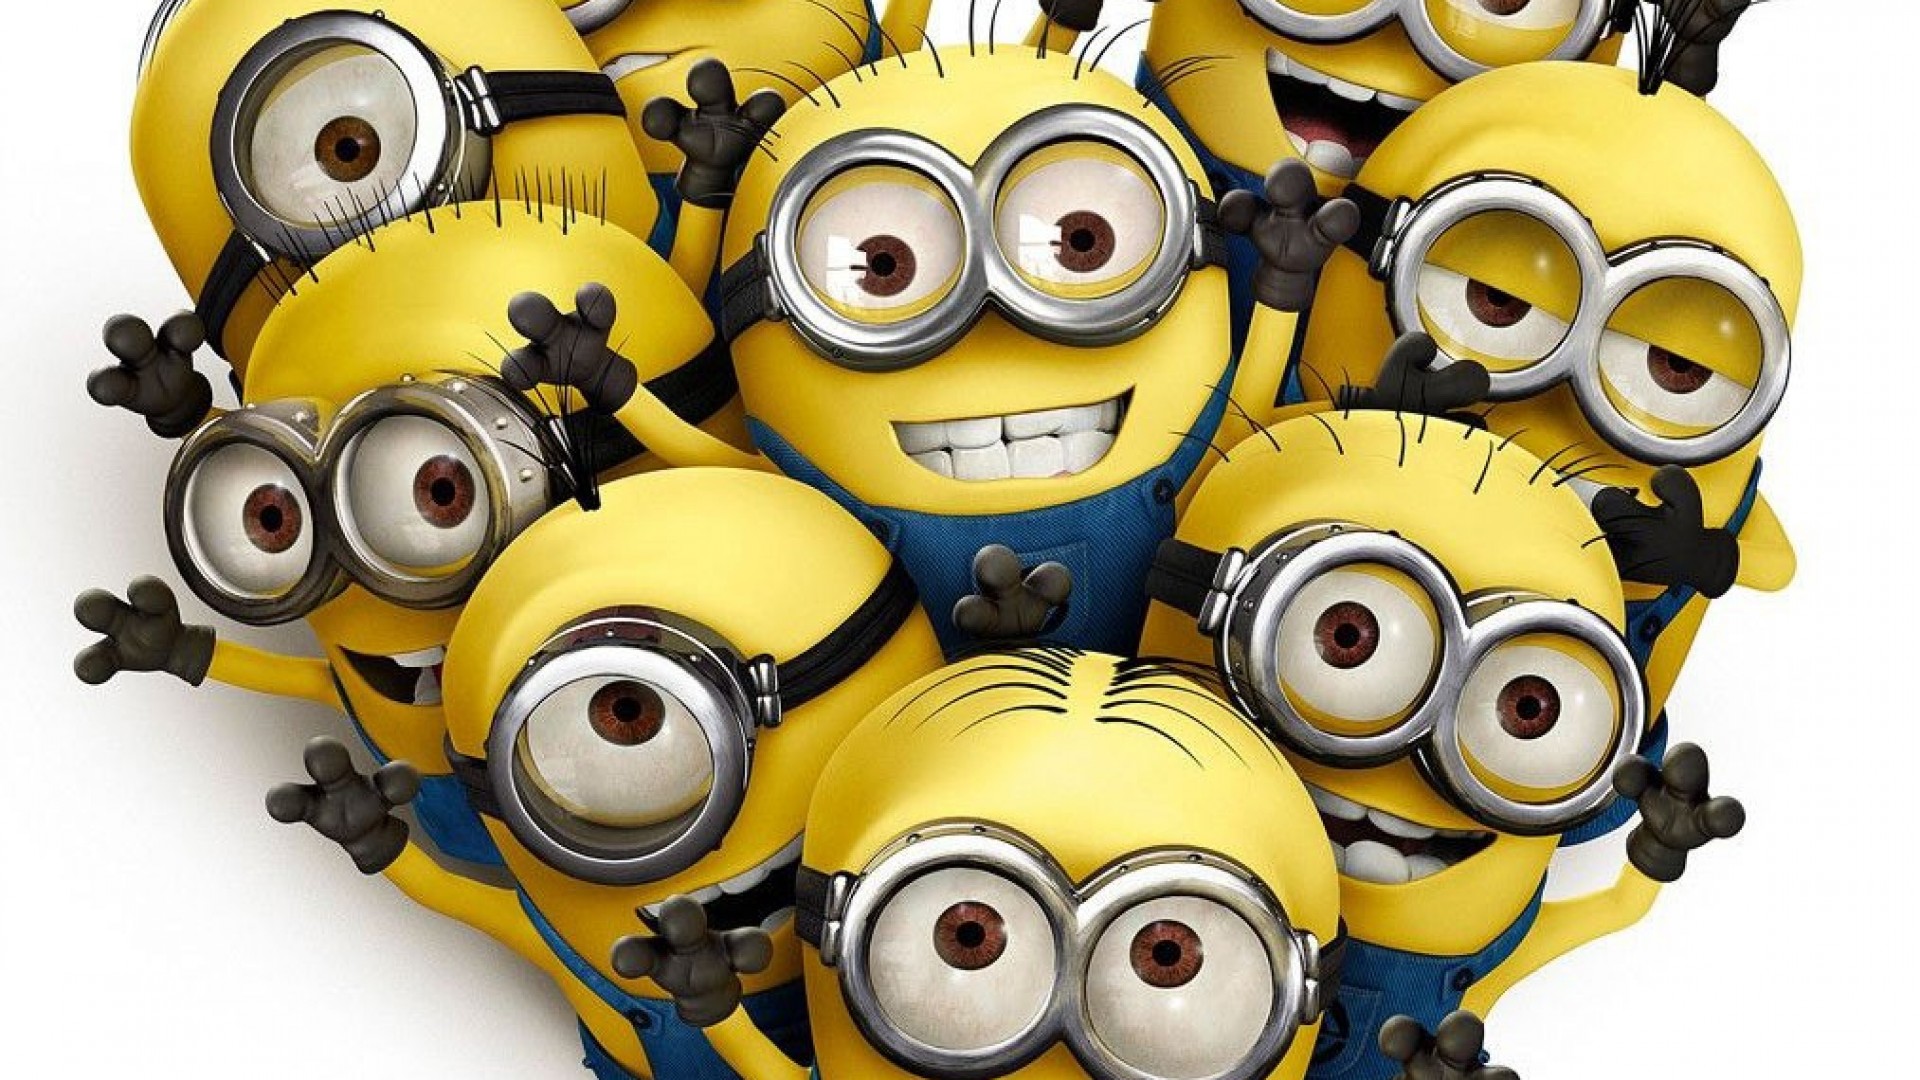 Despicable Me Movie For Mobile